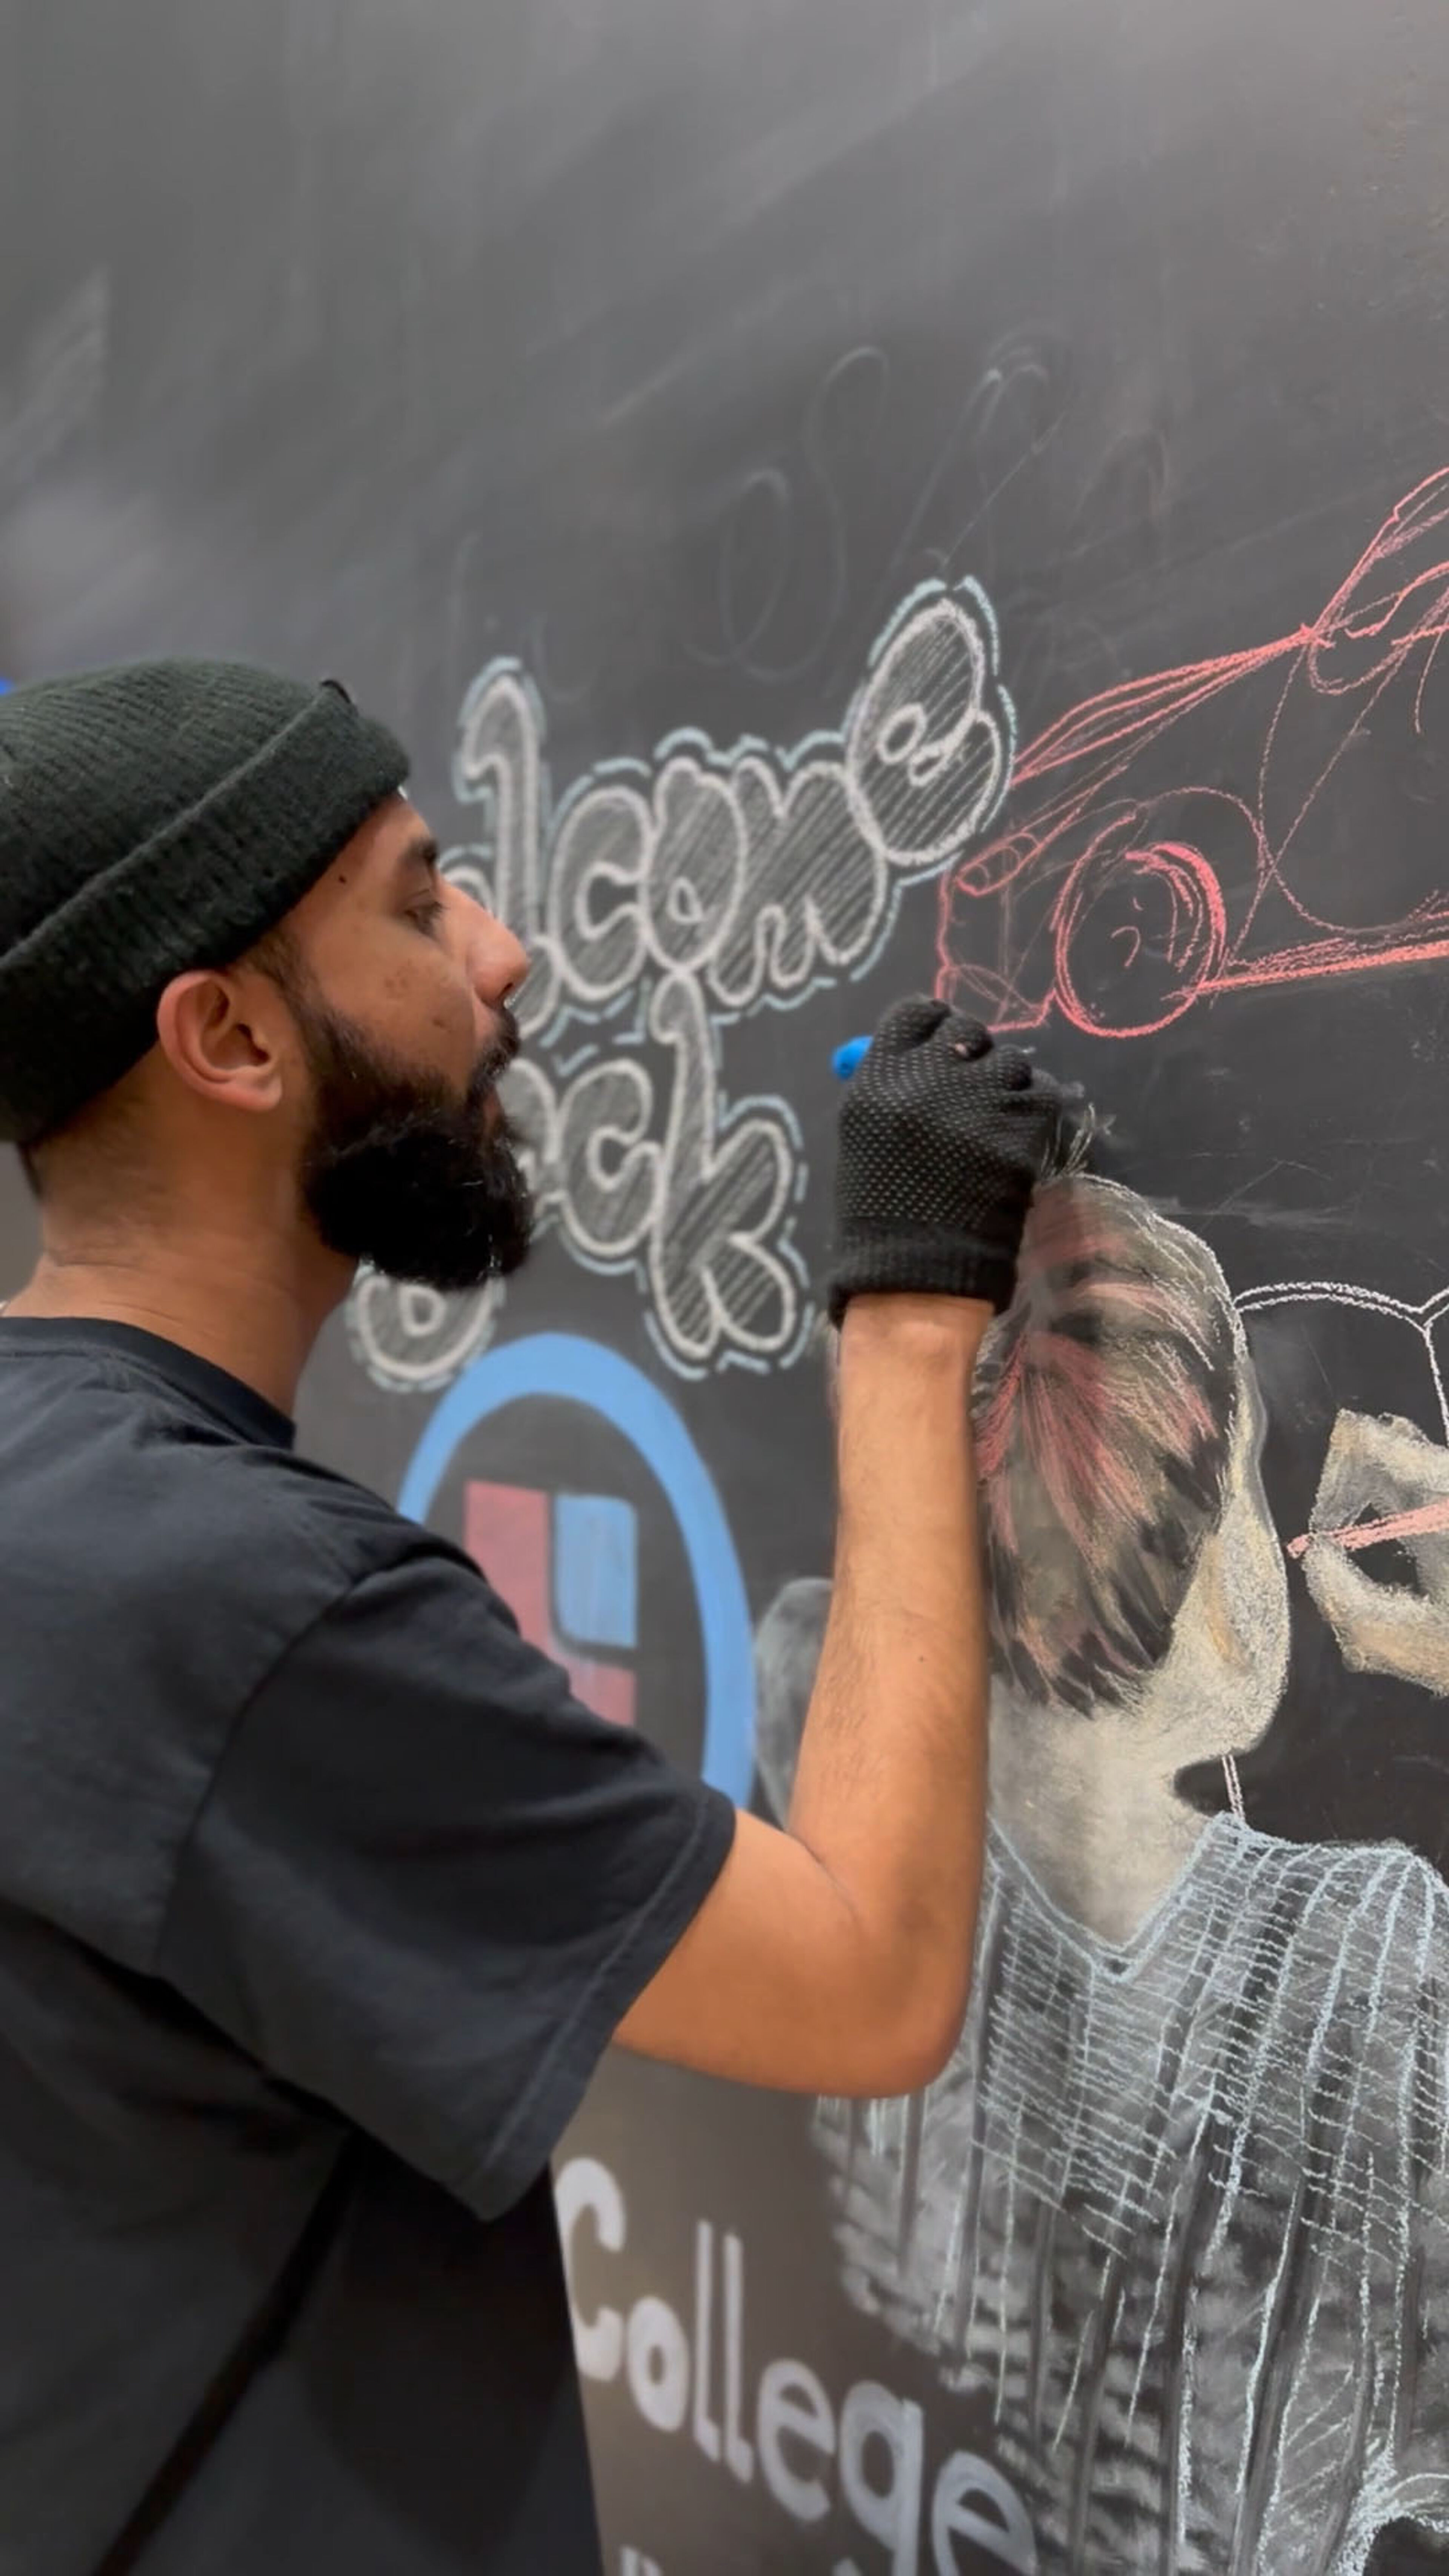 A focused male artist sketches on a chalkboard, detailing a human portrait with white chalk, surrounded by colorful chalk text.